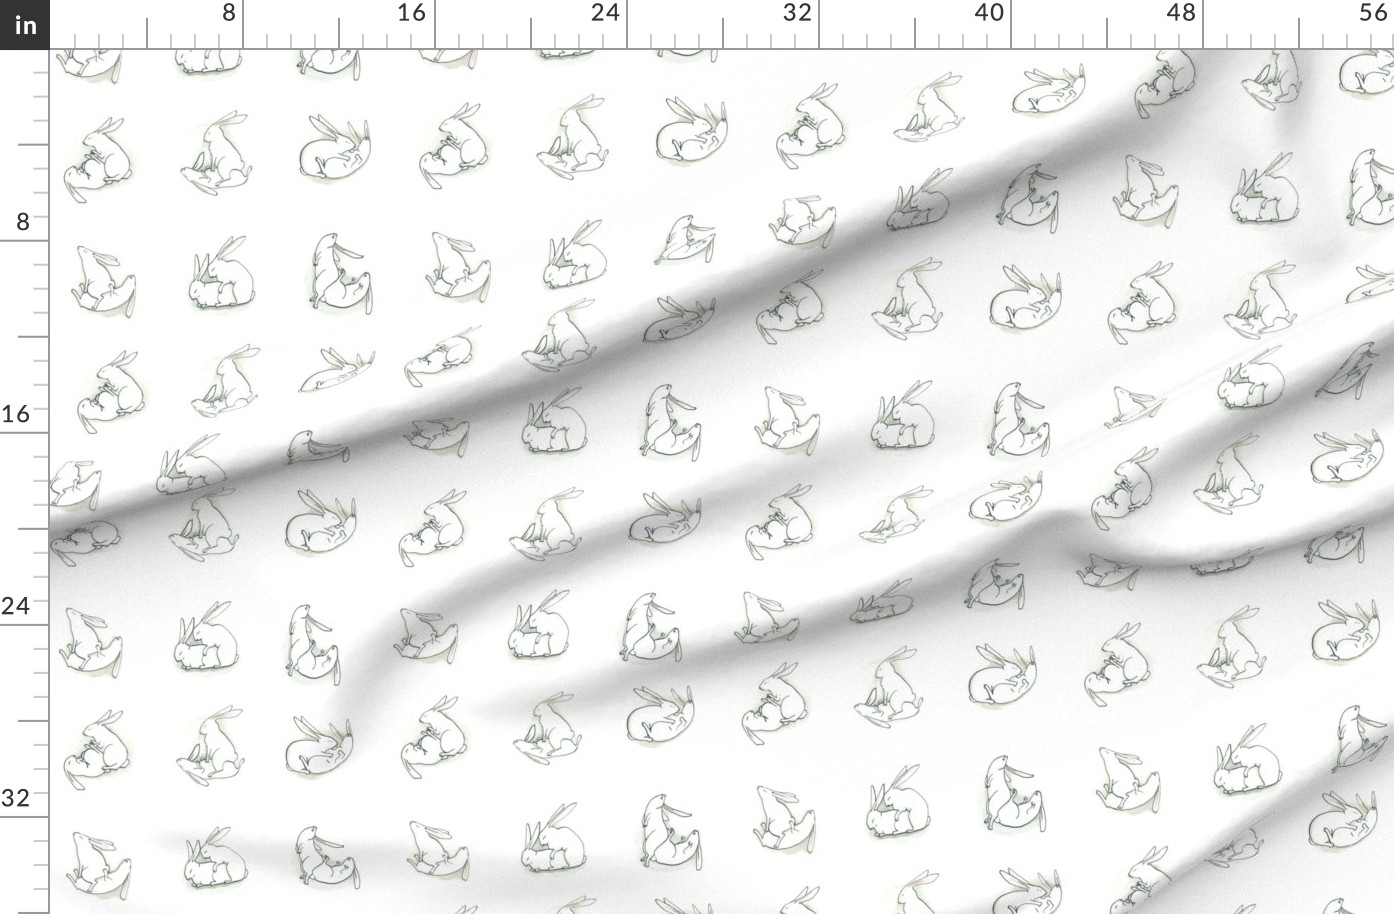 Kaninchen, Hase, Hasen, Sex, Kamasutra, mature_content Stoffe | Spoonflower